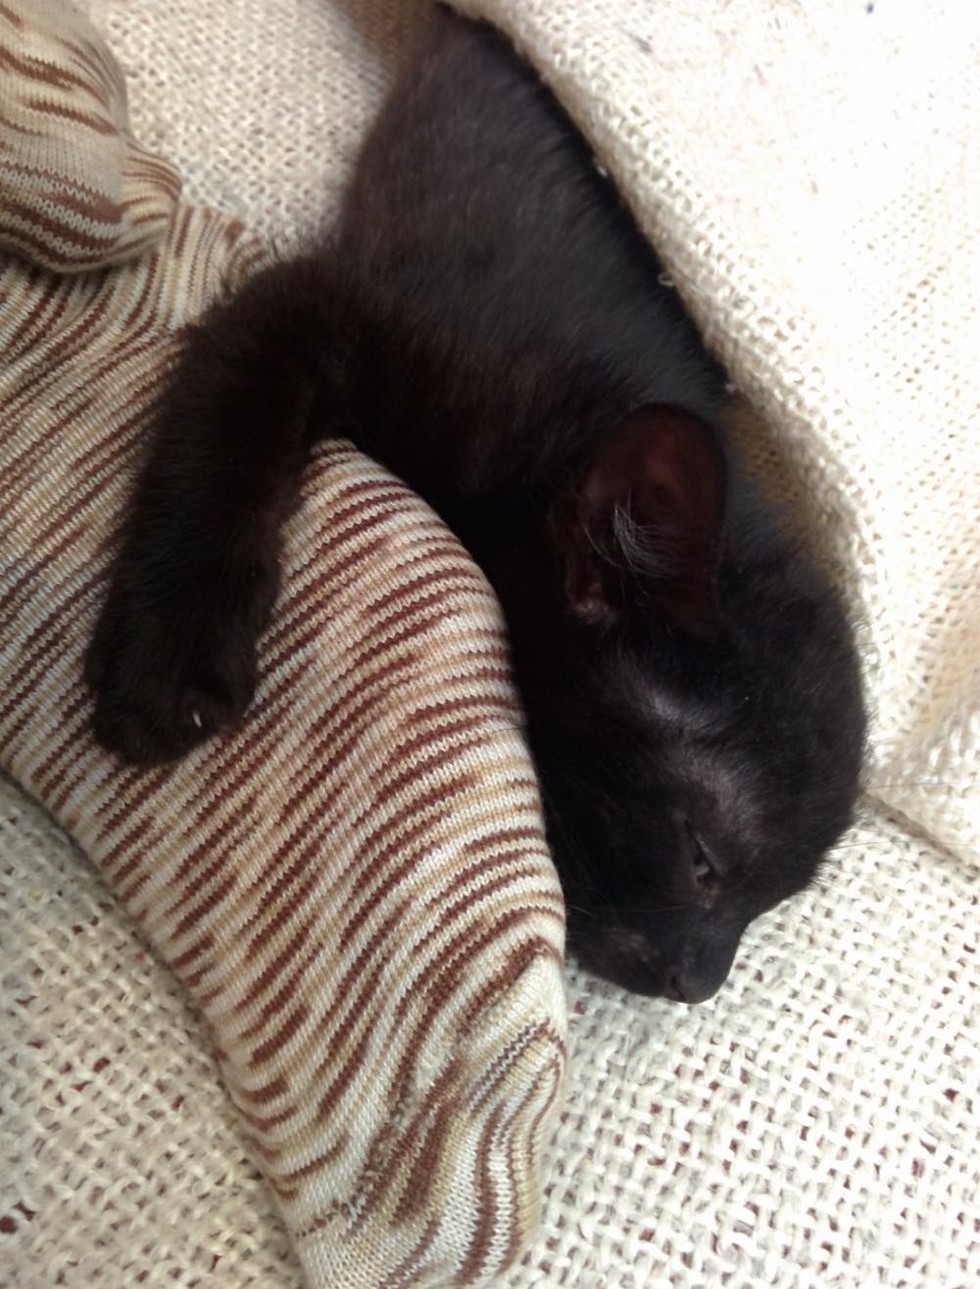 Man Finds a Skinny Kitten Meowing in the Woods, His Life is Changed ...